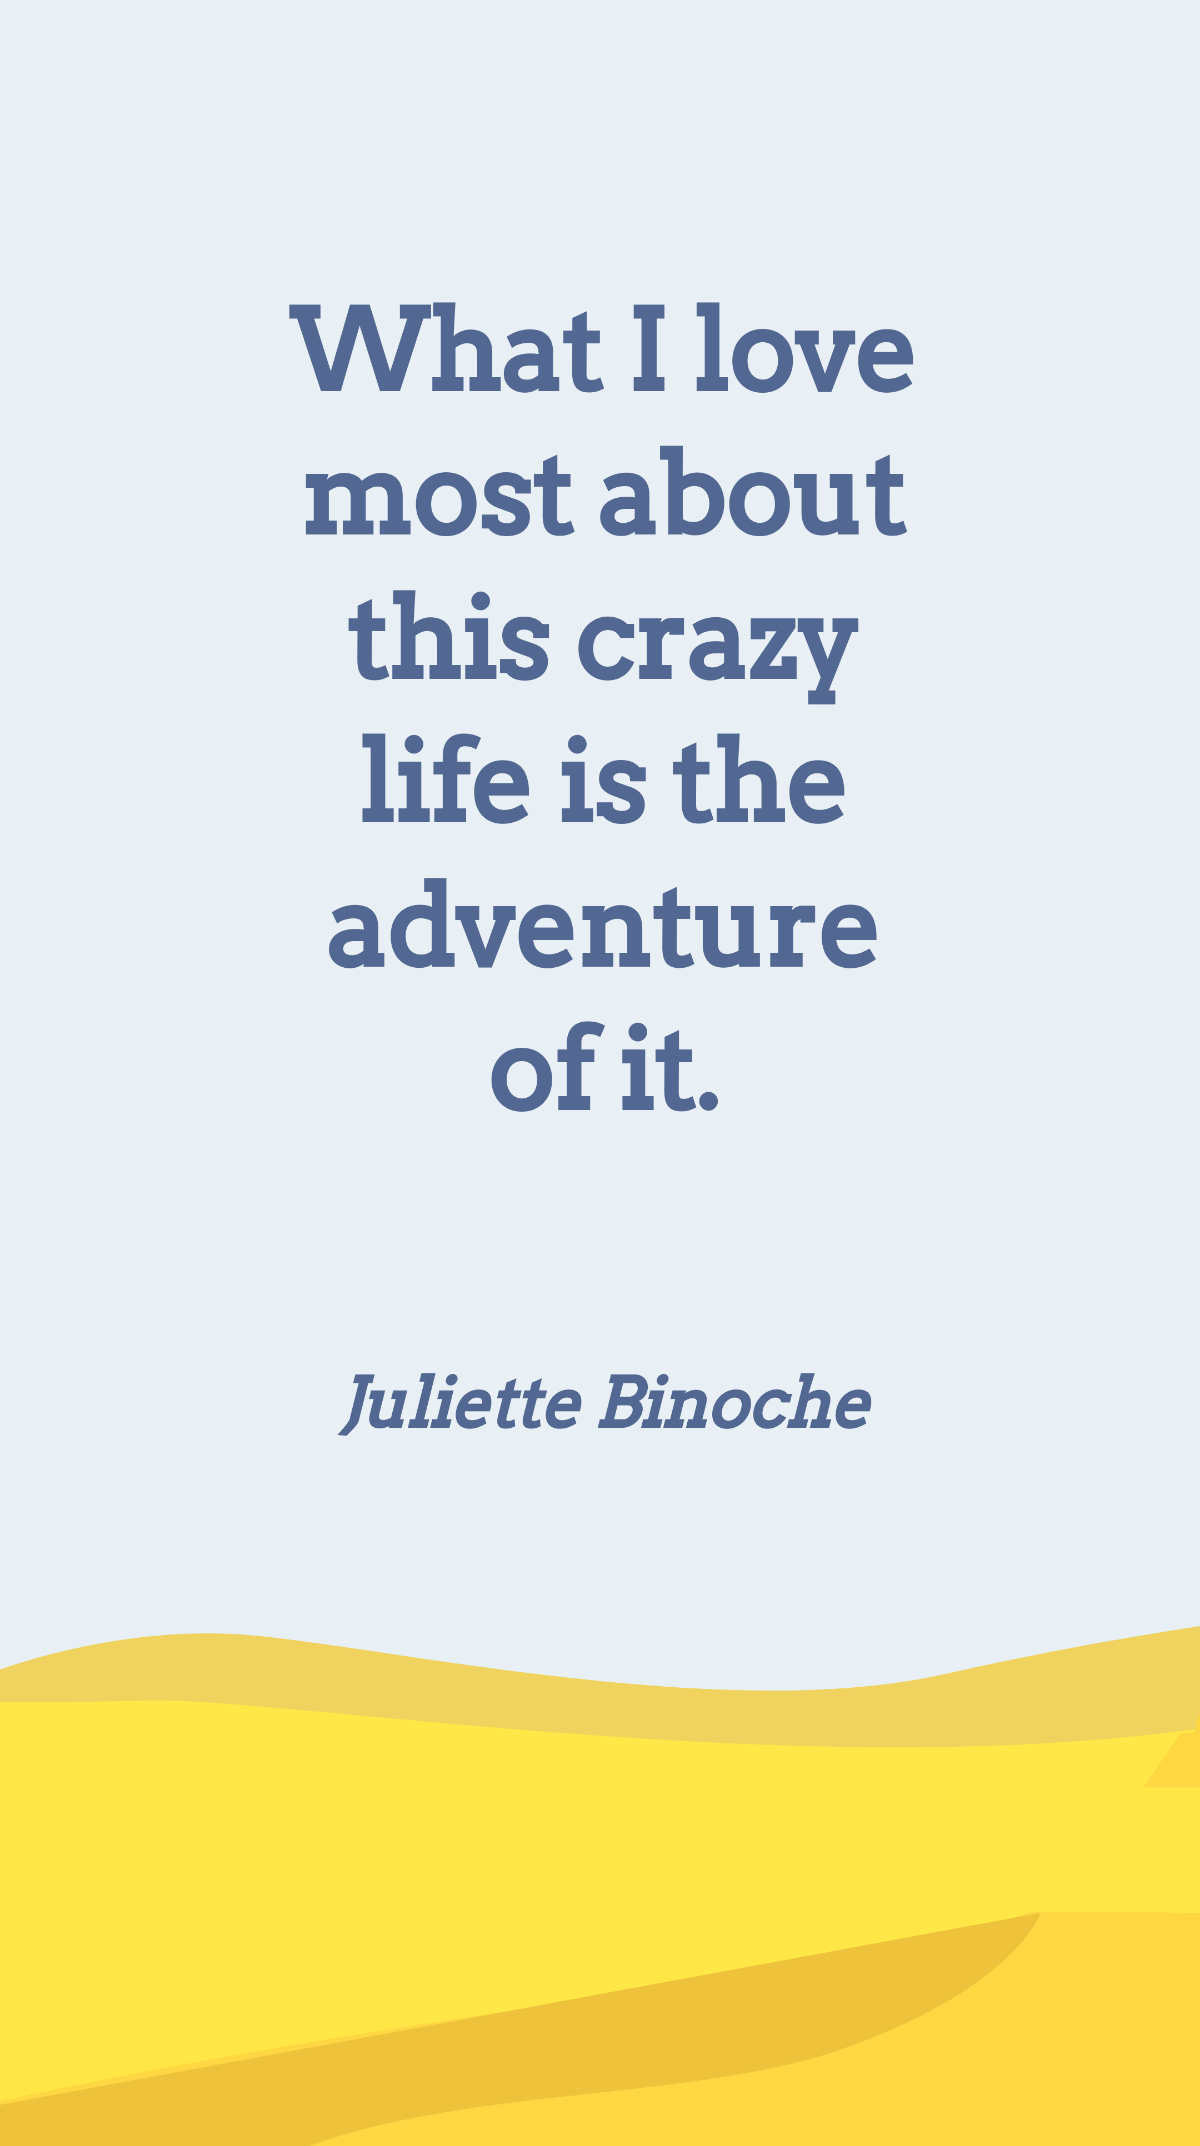 Juliette Binoche - What I love most about this crazy life is the adventure of it. Template